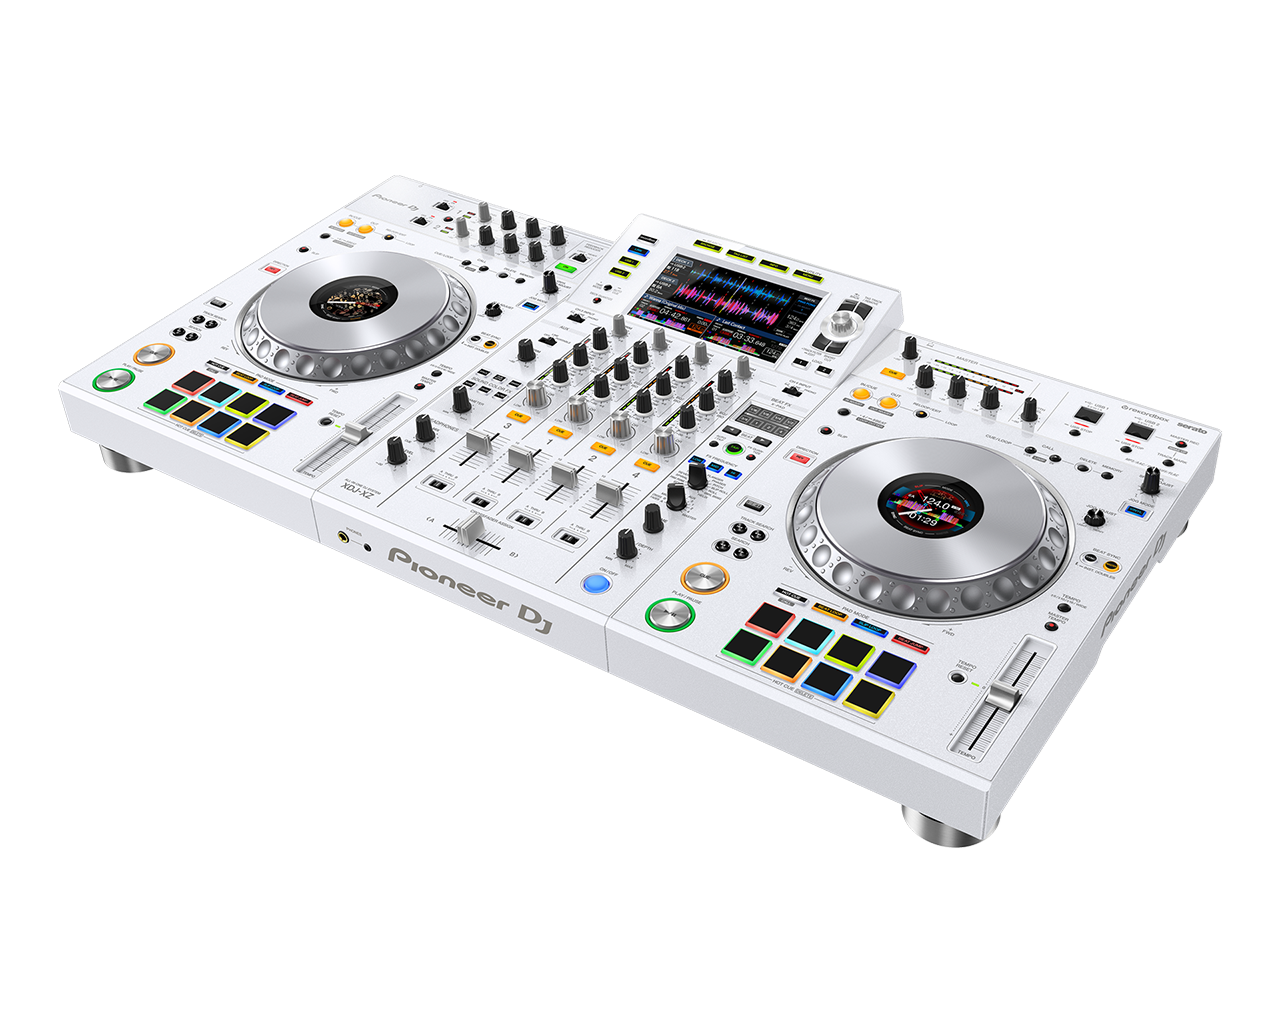 Pioneer XDJ-XZ (Hong Kong licensed) all-in-one DJ system